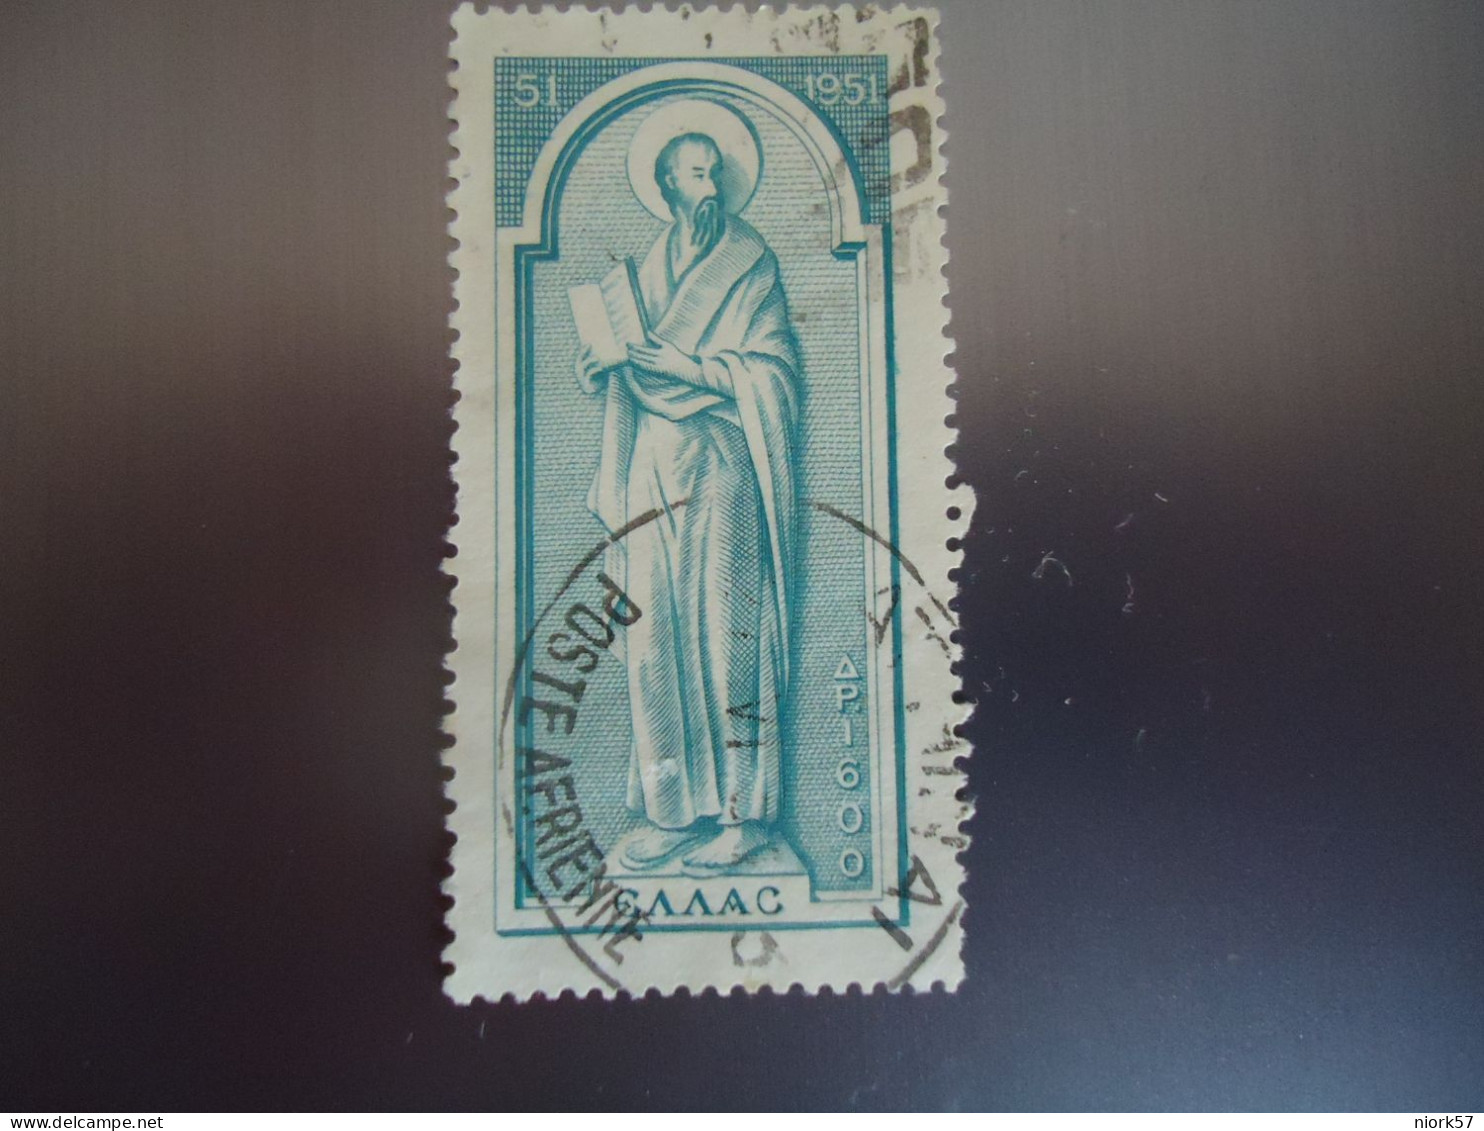 GREECE   USED STAMPS   POSTMARK  ΠΑΥΛΟΣ  ΑΘΗΝΑΙ POSTE AERIENNE 1951 - Used Stamps